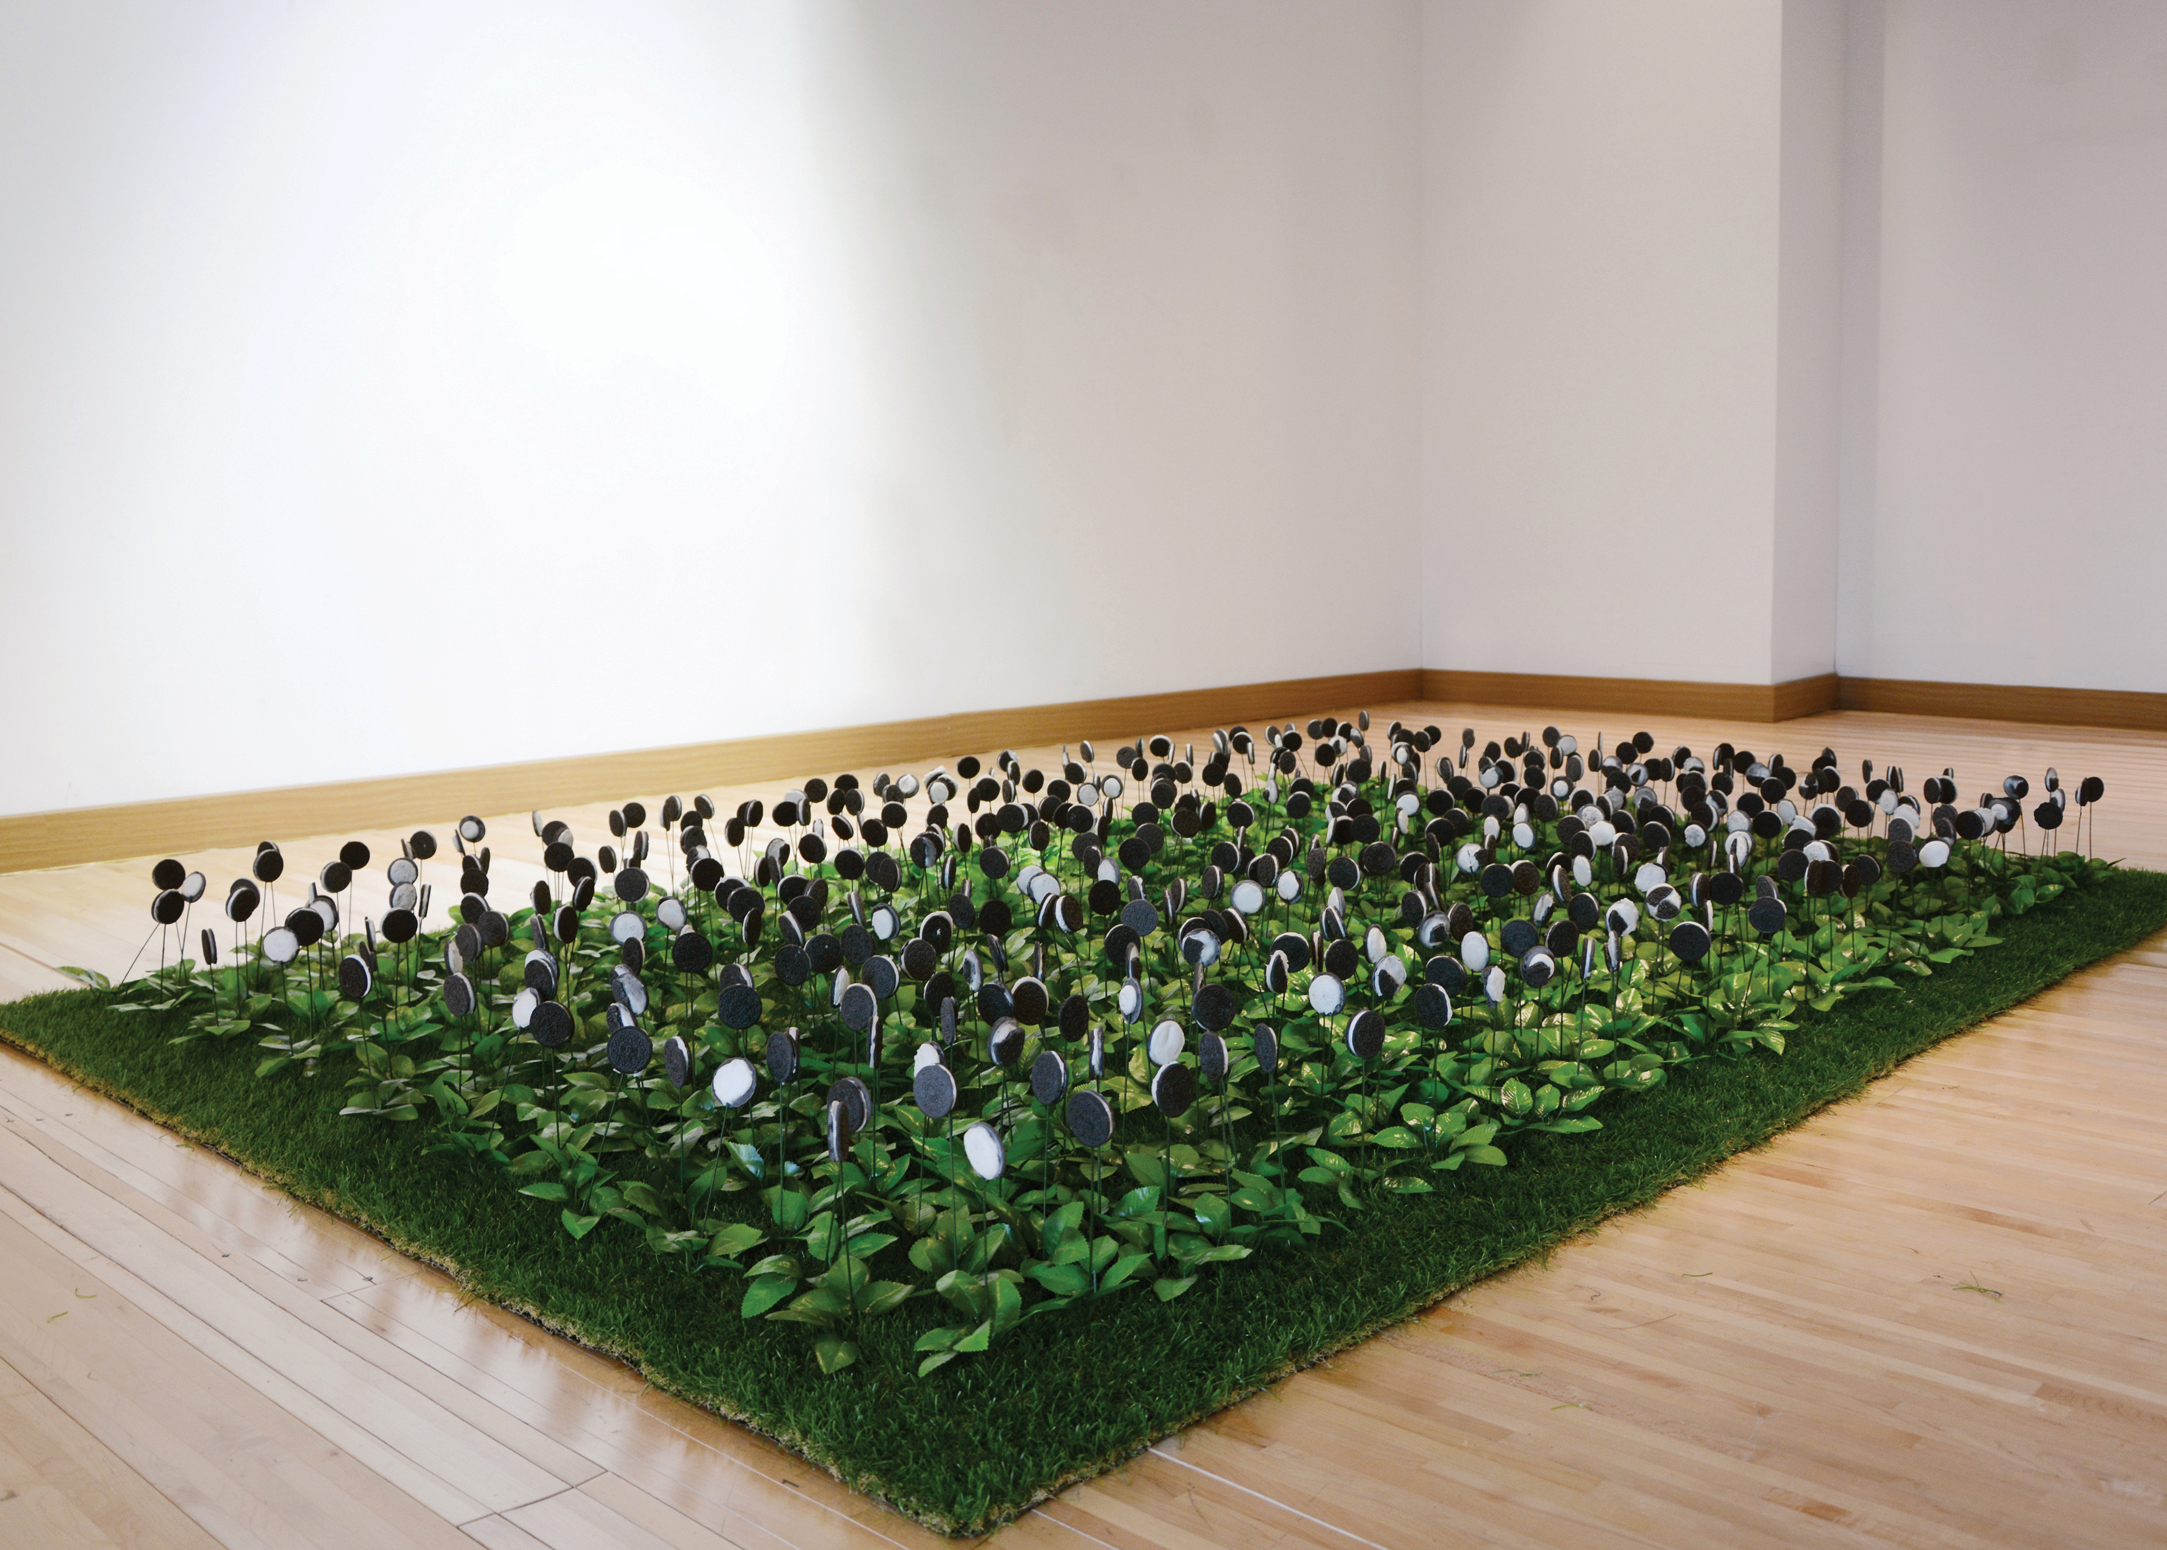 Image of Soojin's work Memorial No. 2, 2013 plastic oreos and plants